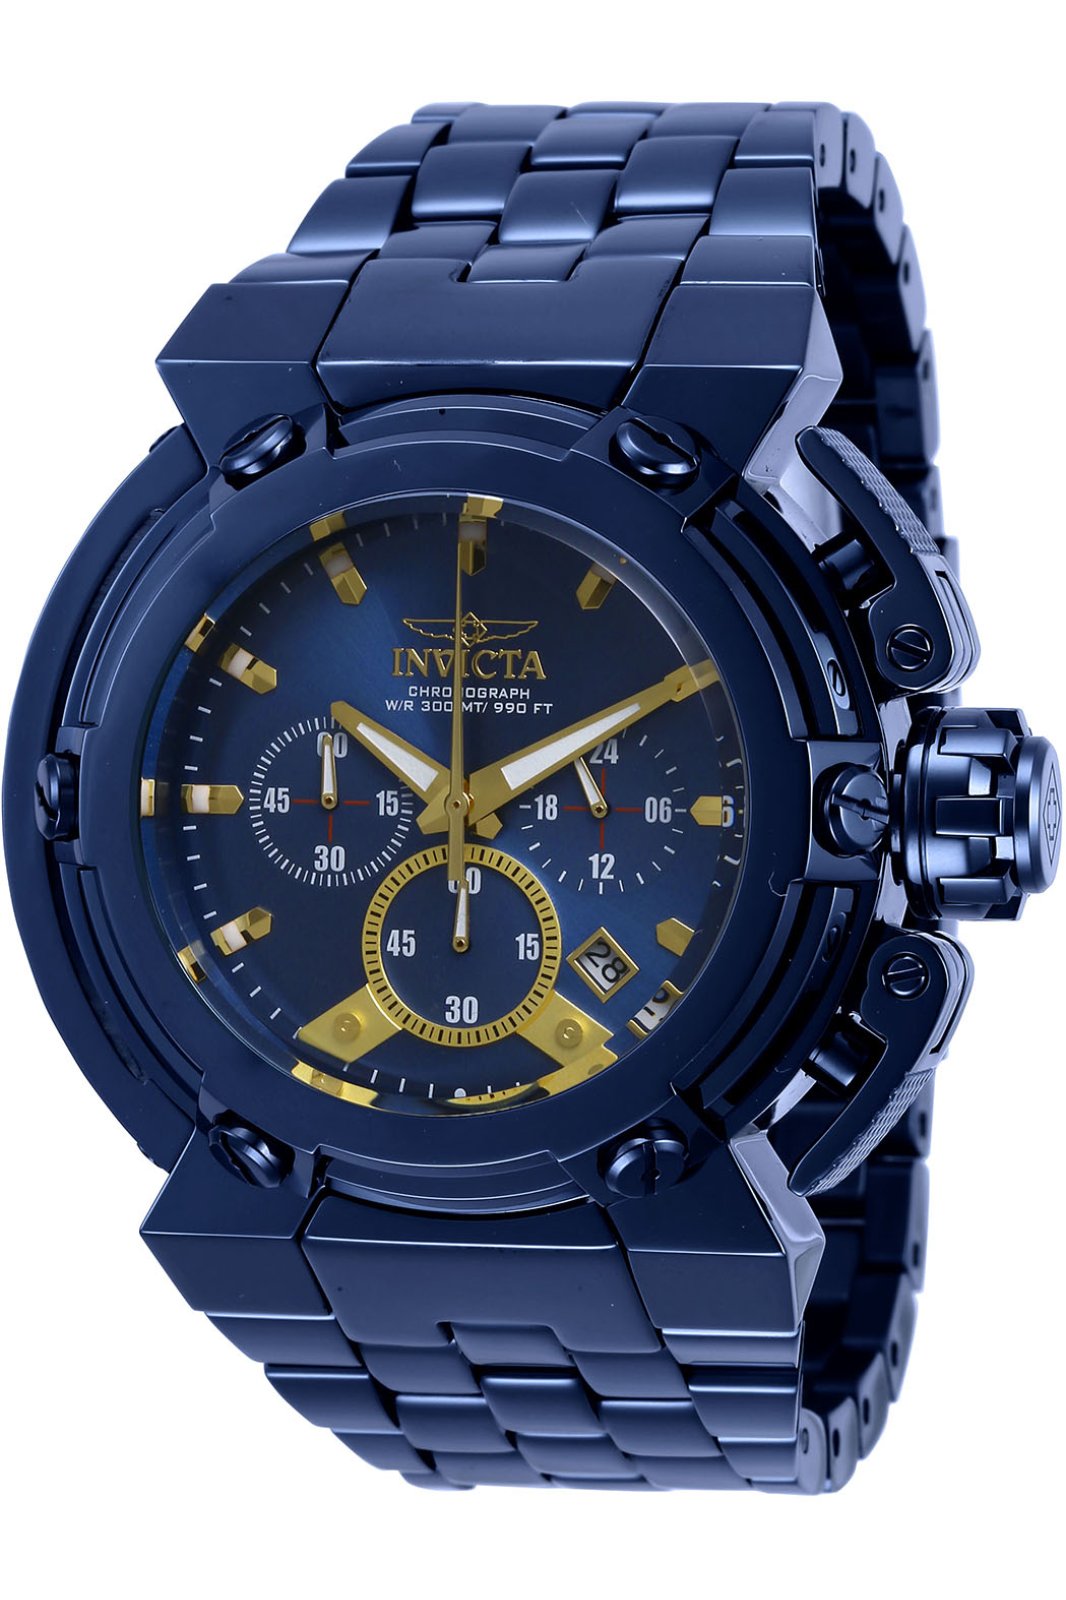 Invicta Watch Coalition Forces - X-Wing 28627 - Official Invicta